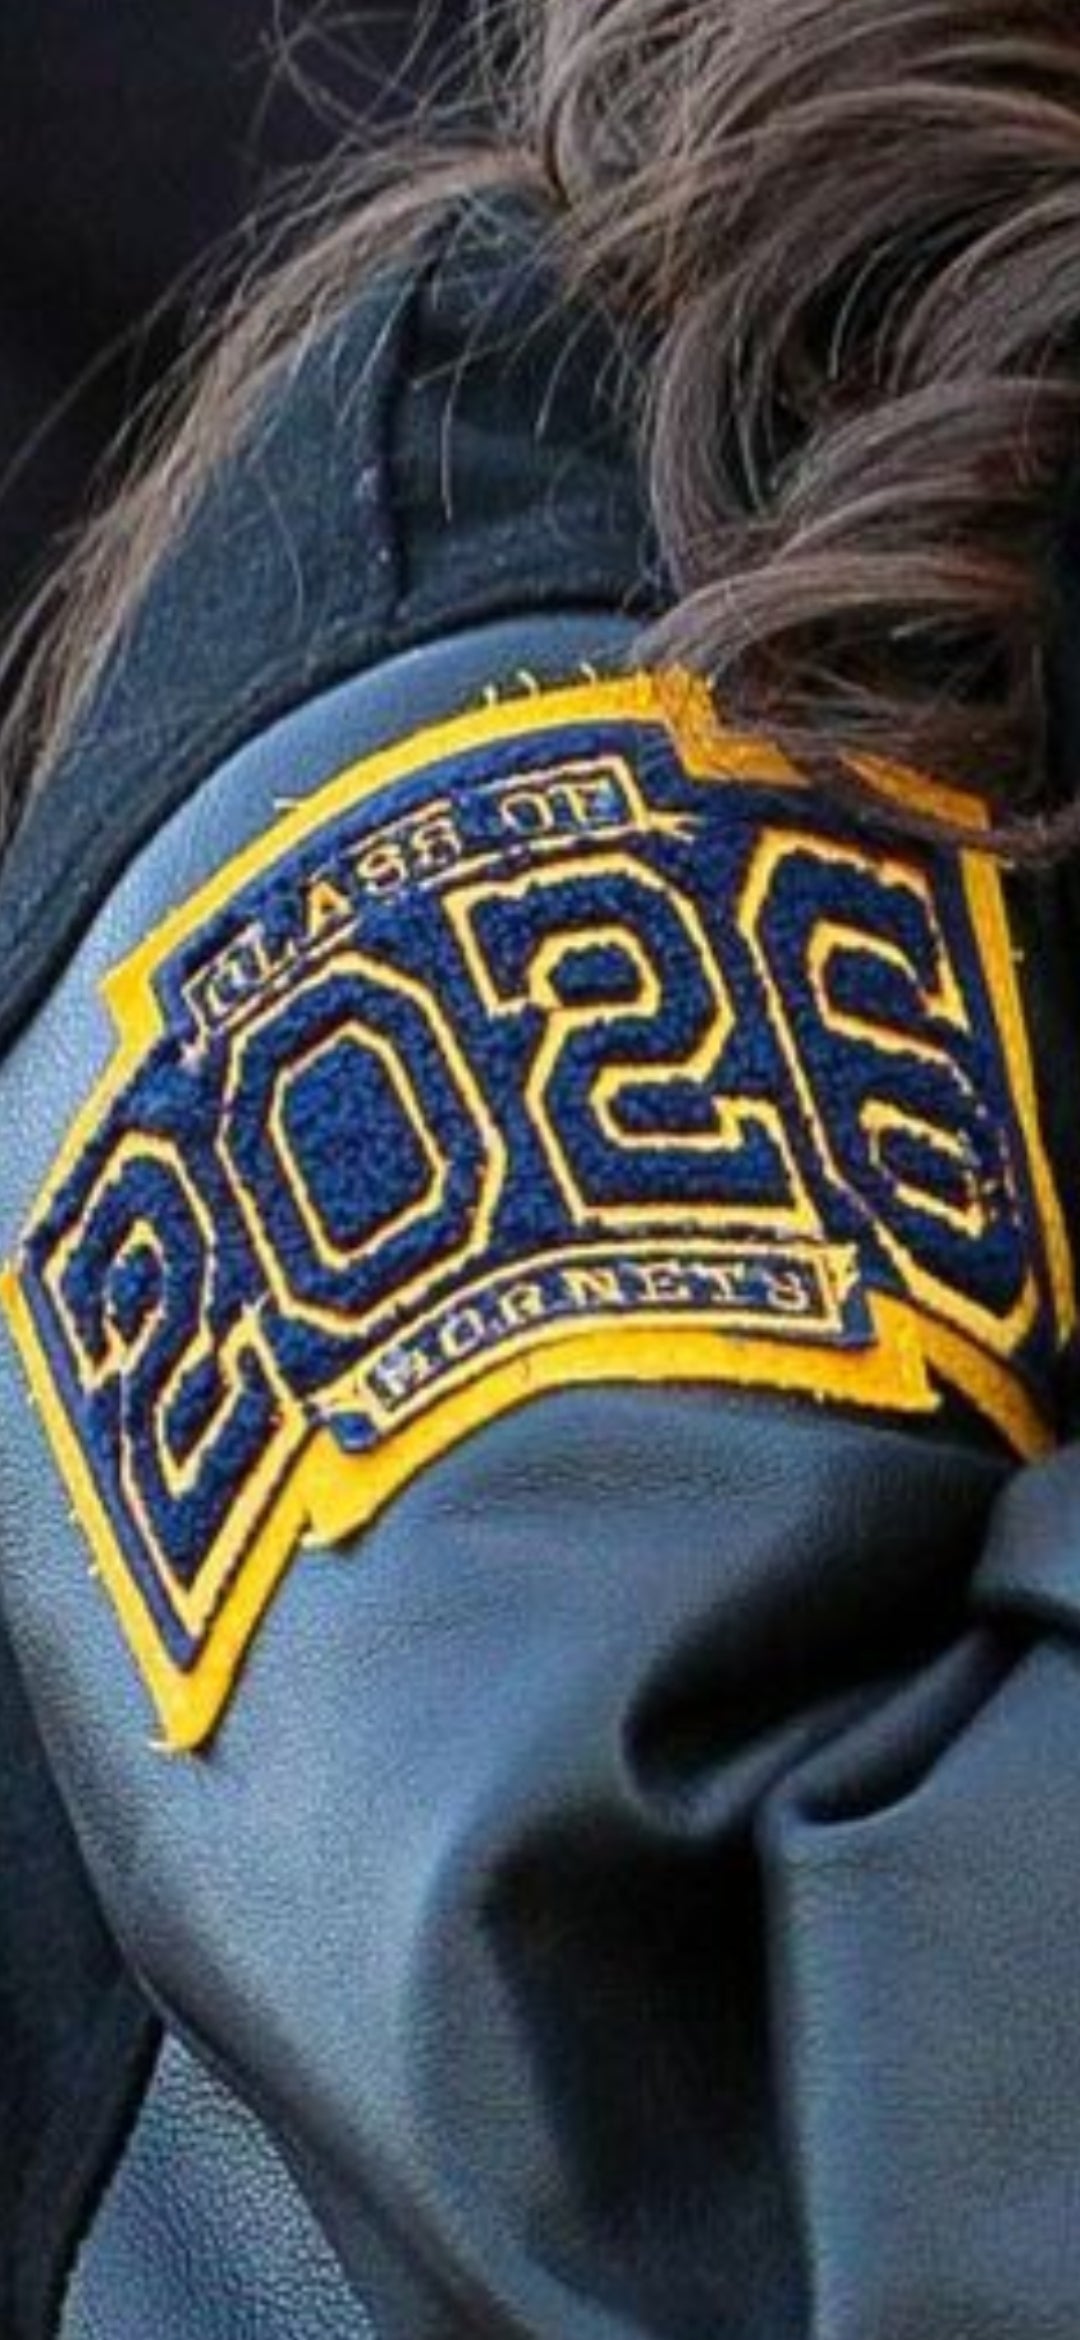 #1731 Year Patch